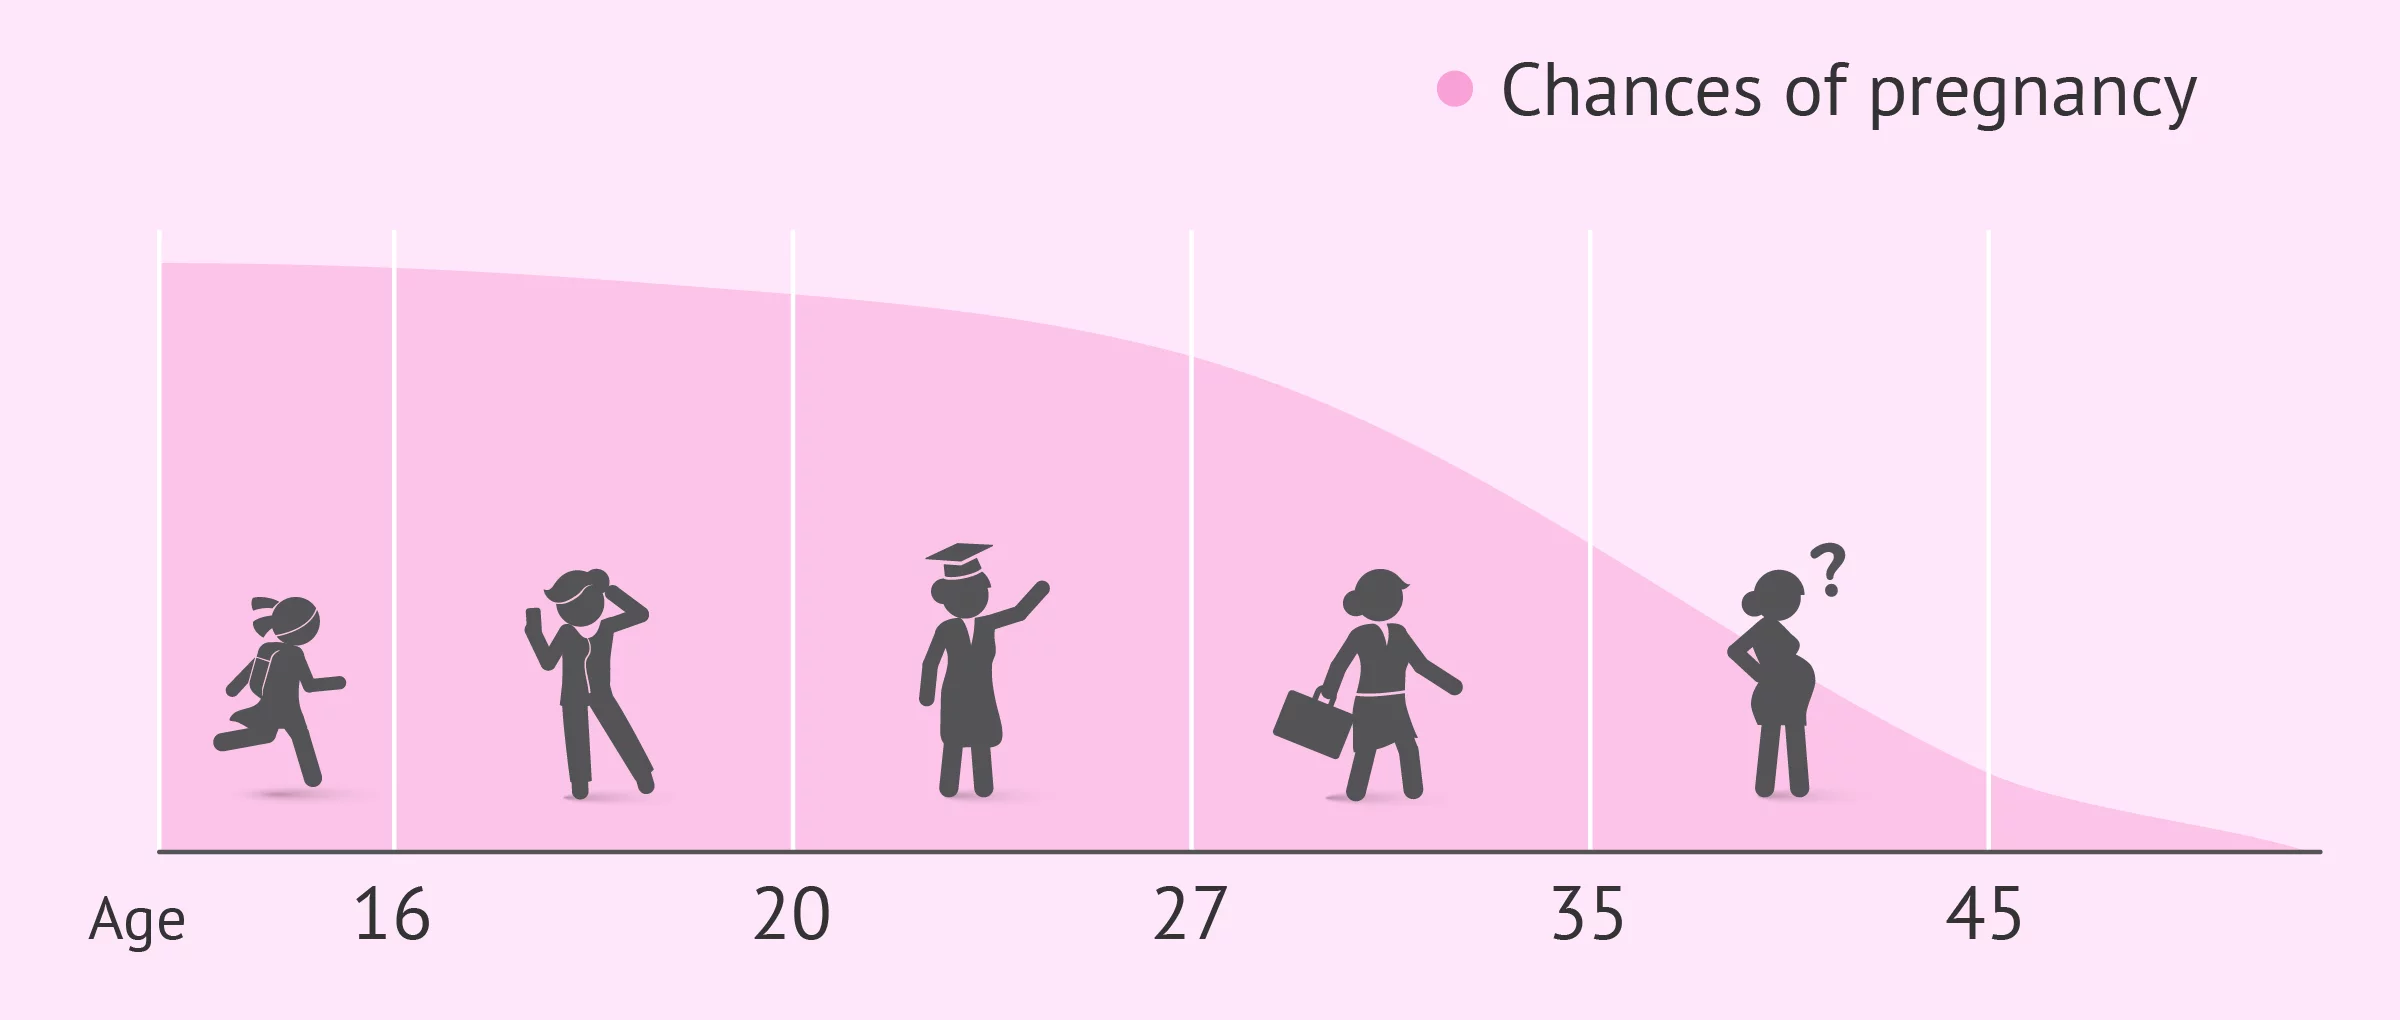 Chances of pregnancy by age chart